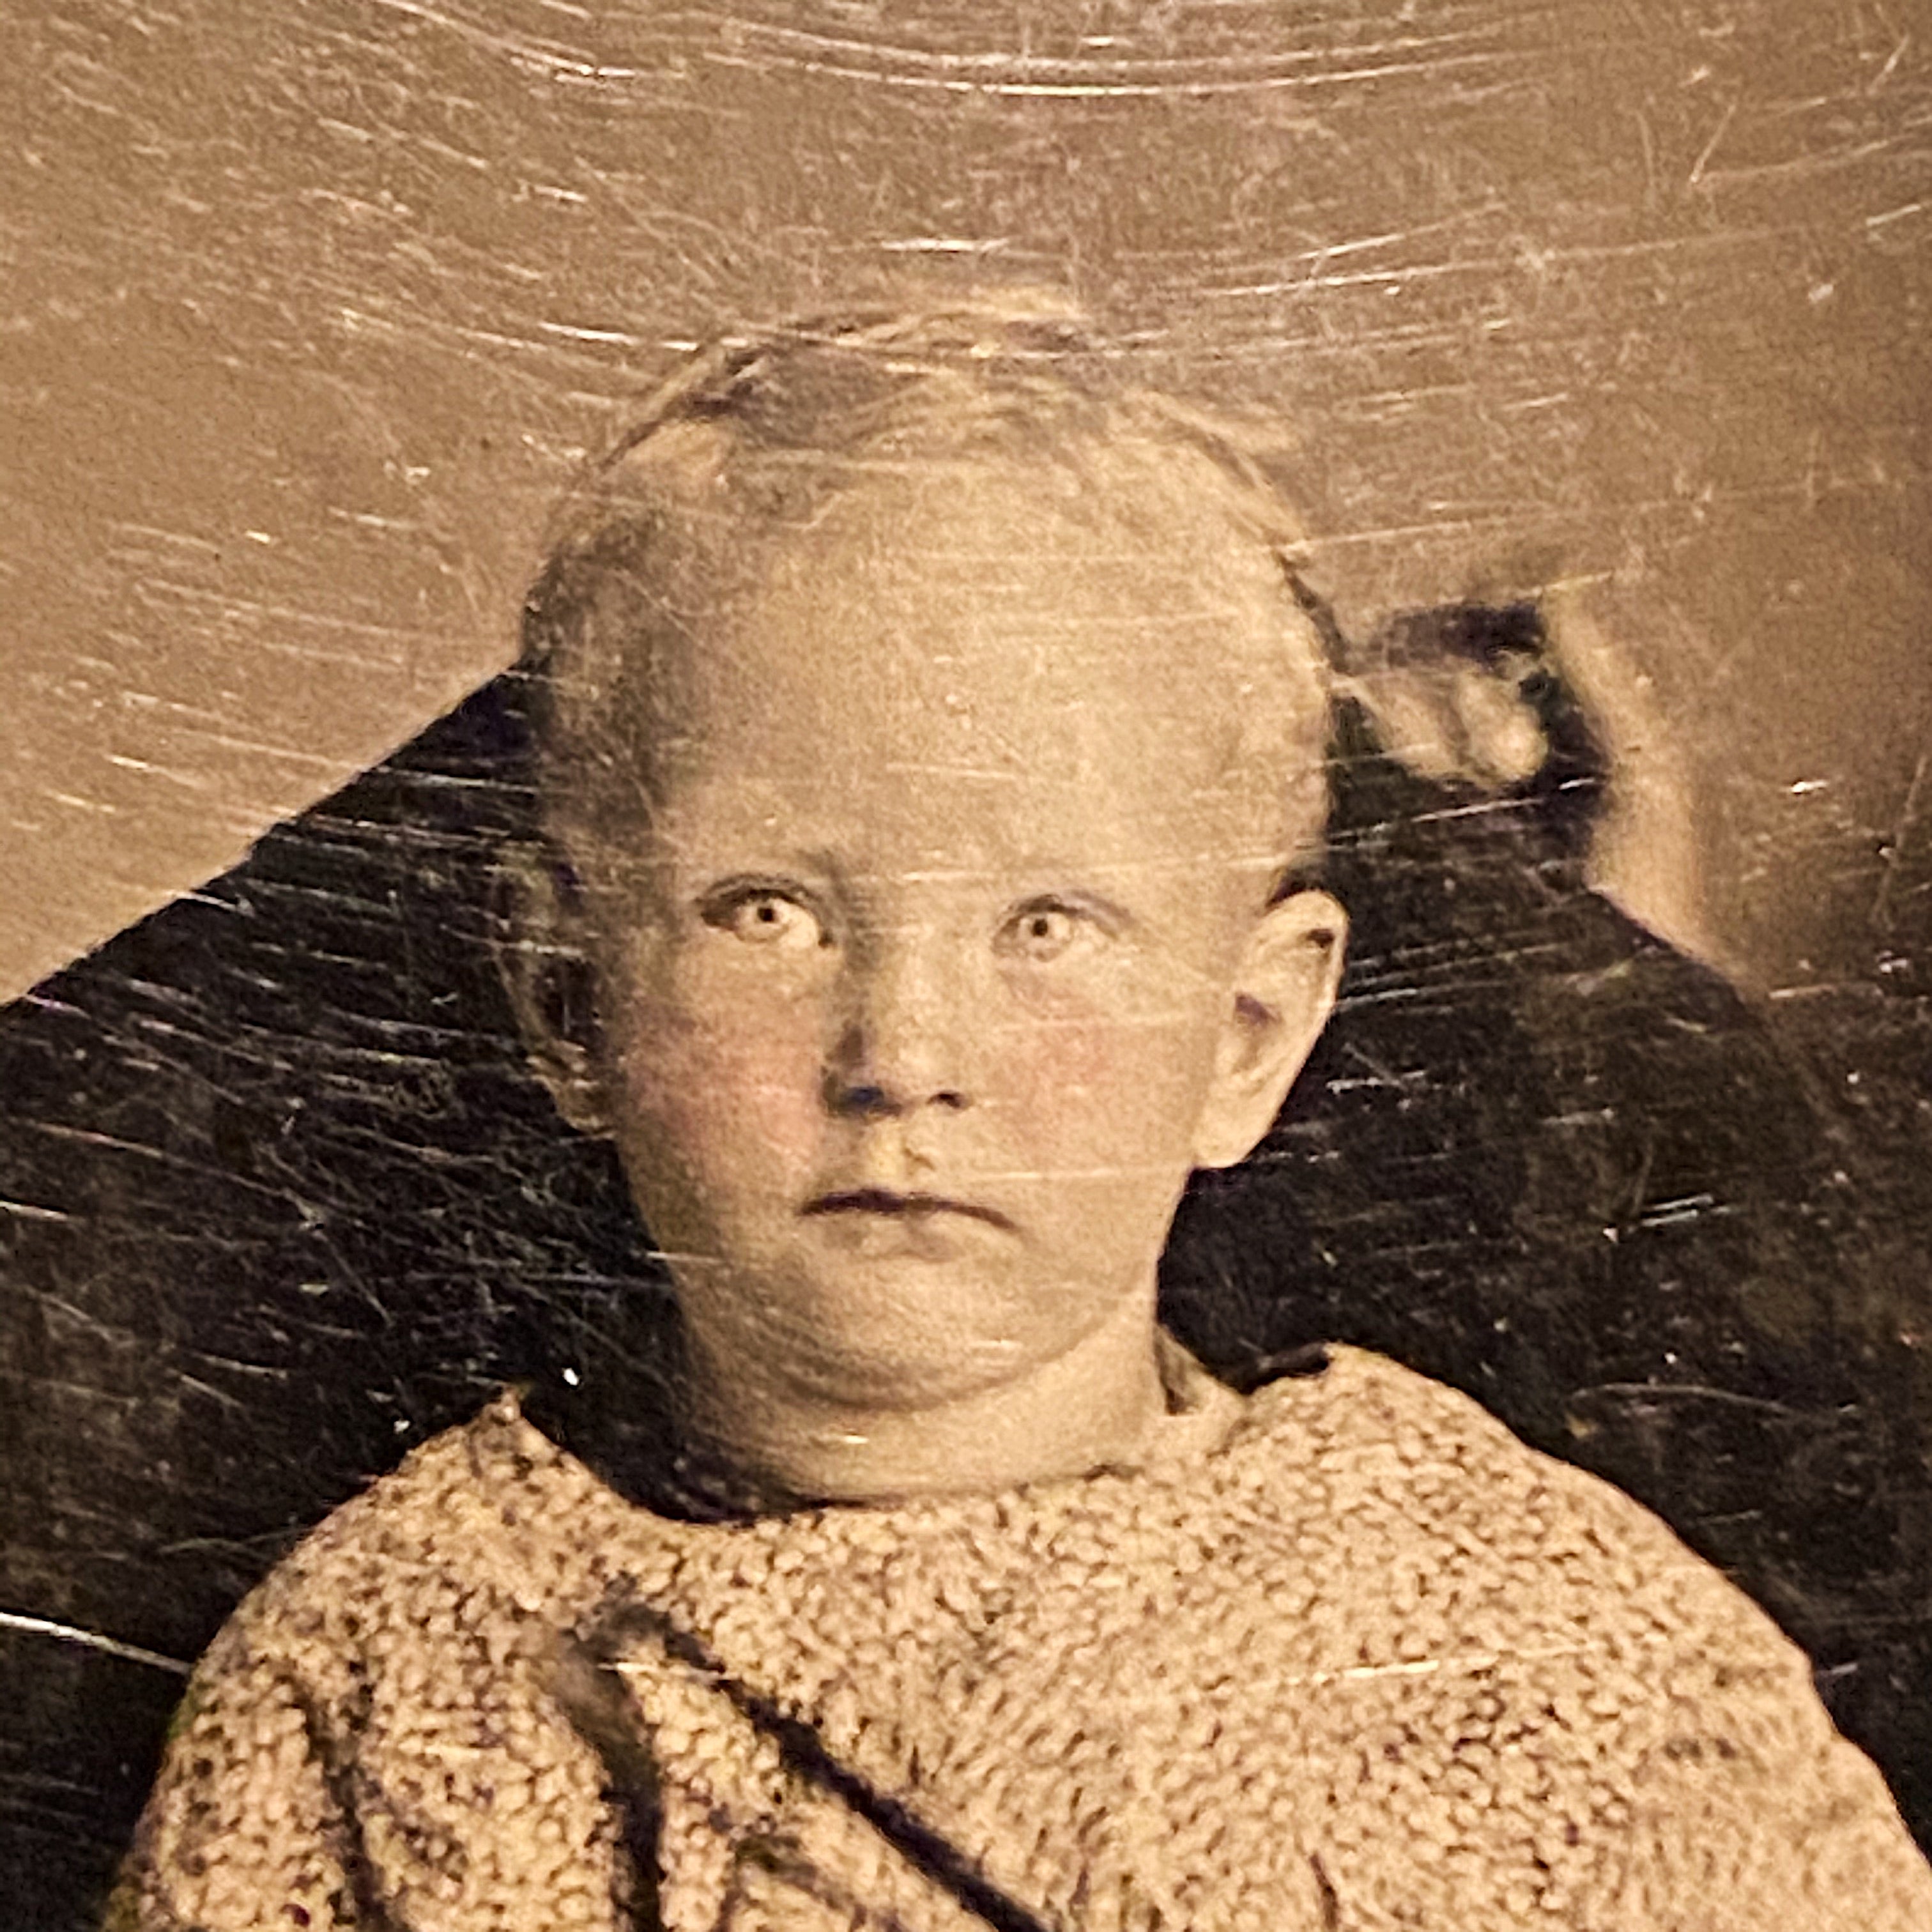 Face of child Antique Tintype of Child Holding a Violin - Early 1900s - Whimsical Scene - Unusual Photography - Rare Musical Photo